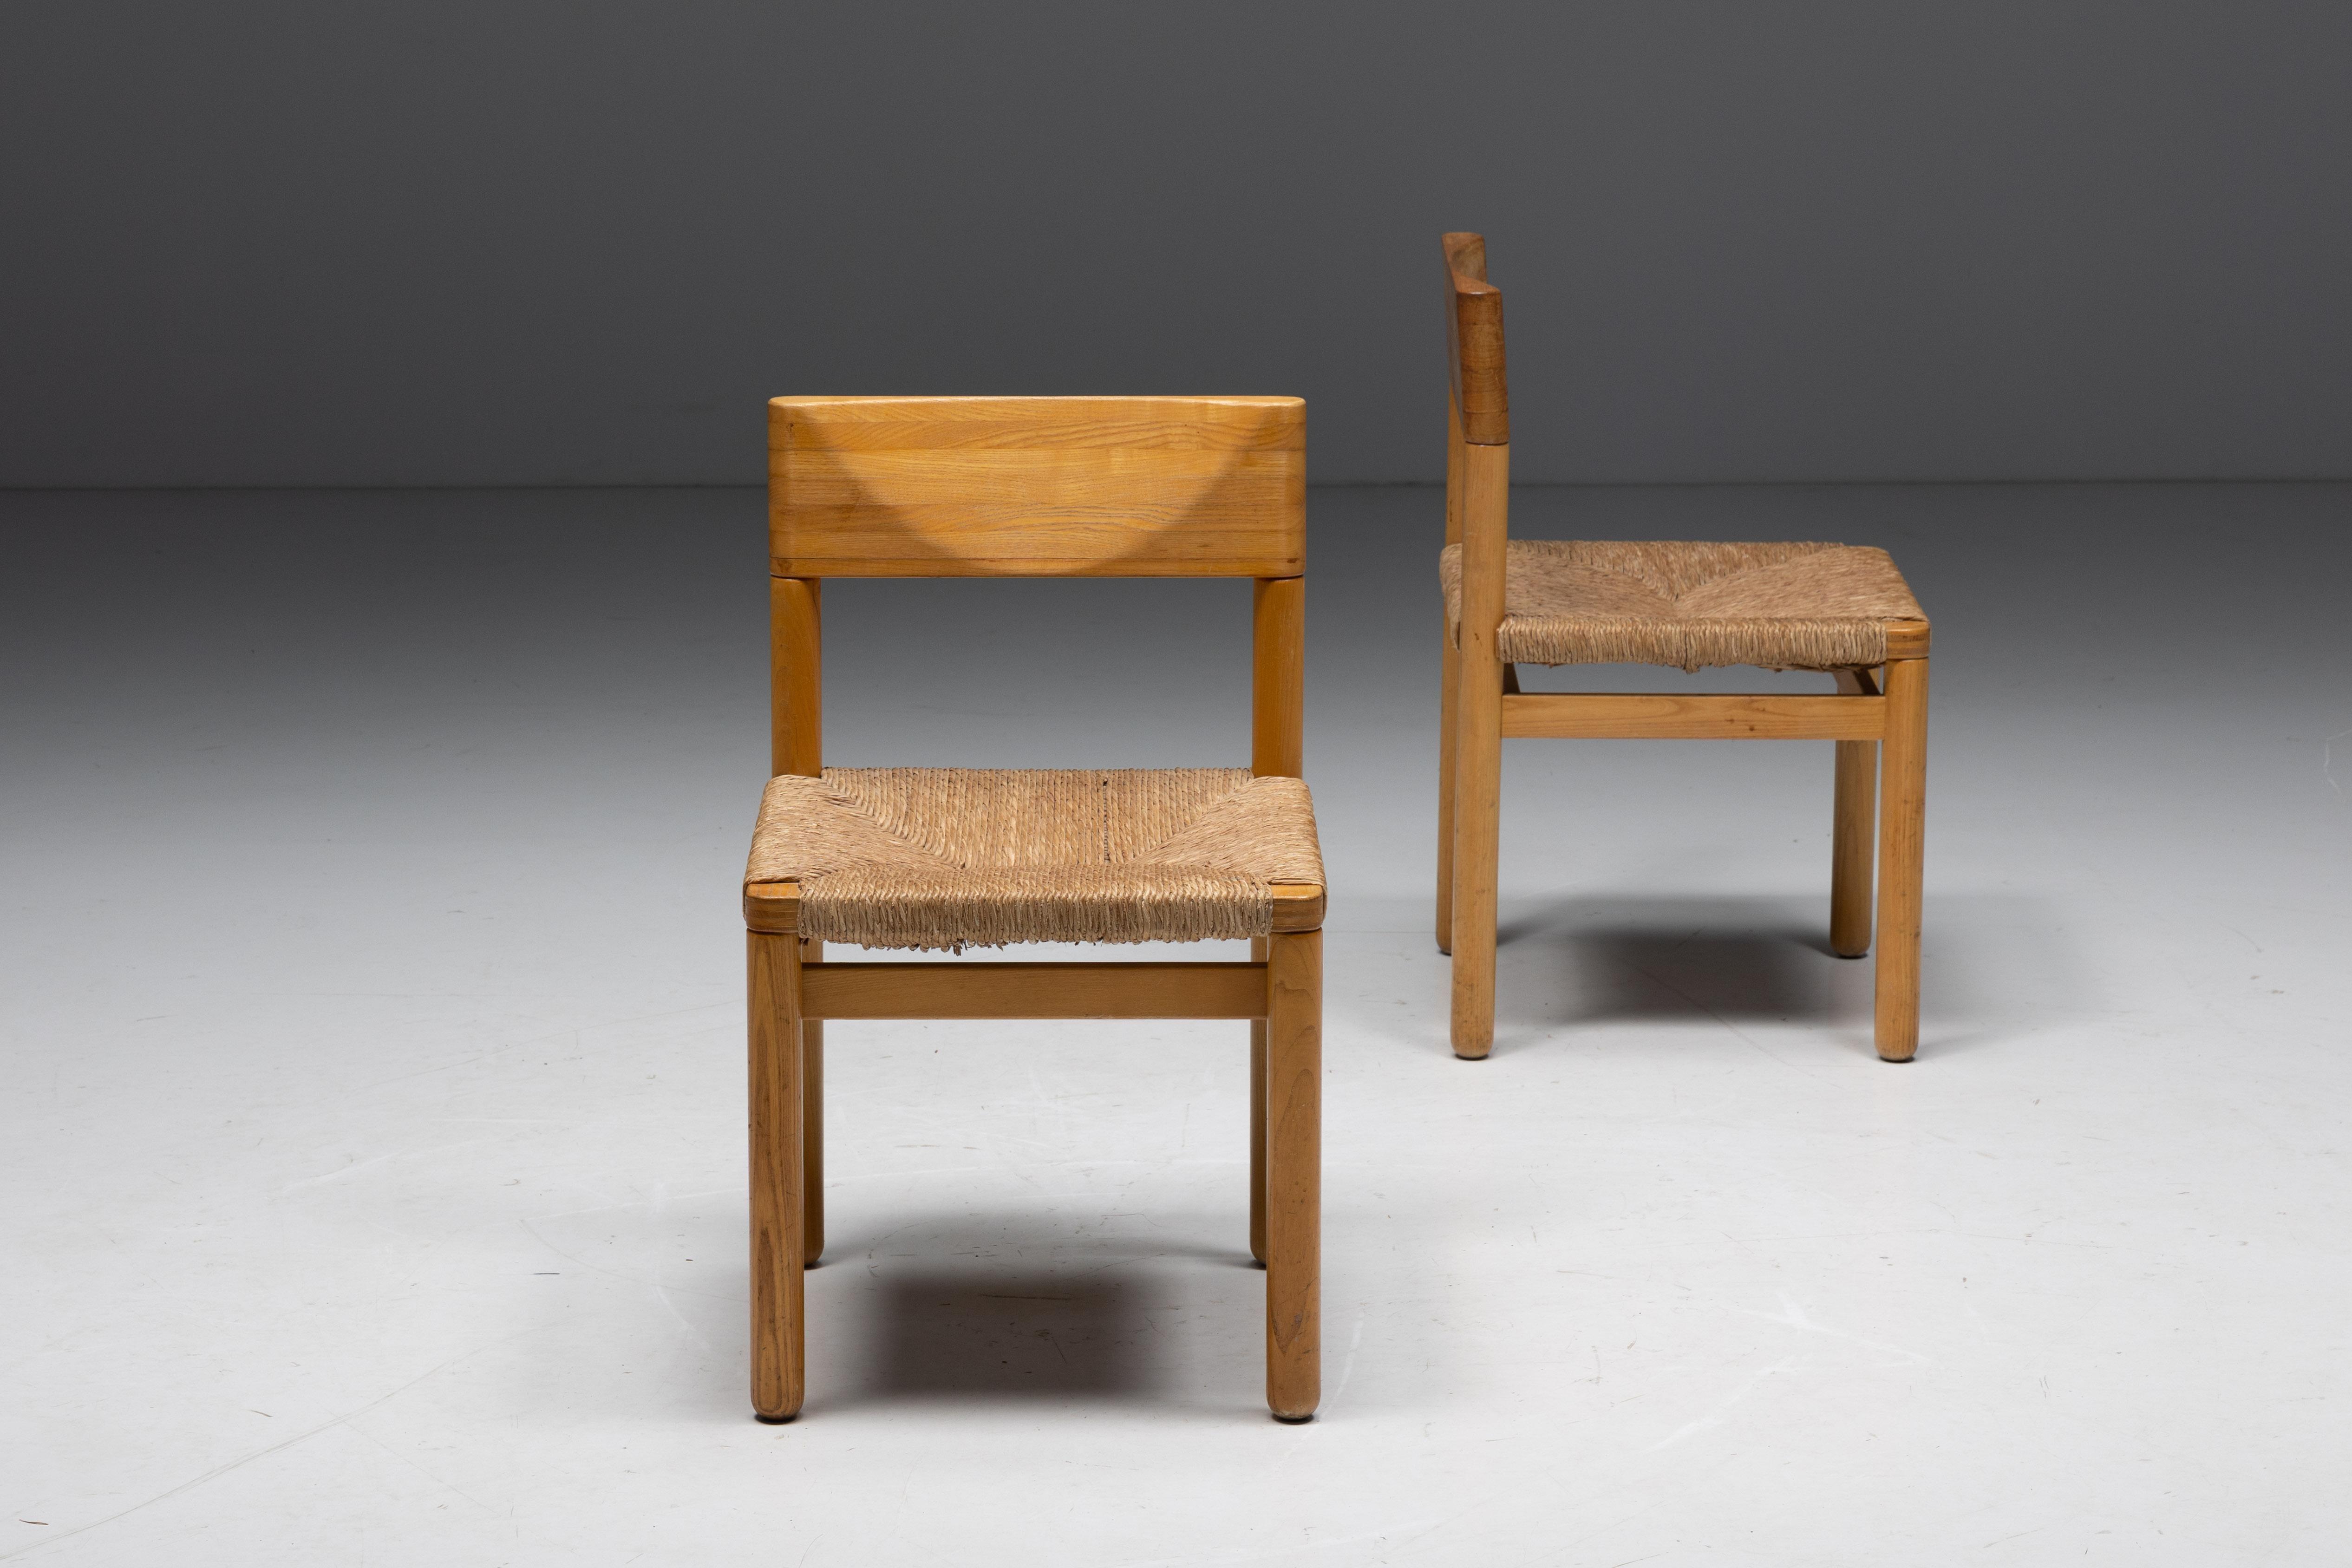 Dining chairs in the style of Charlotte Perriand from the 1960s. These chairs are made of beautiful pine and feature an enchanting straw seat, which adds warmth to their overall design. These chairs are in beautiful original condition and price per